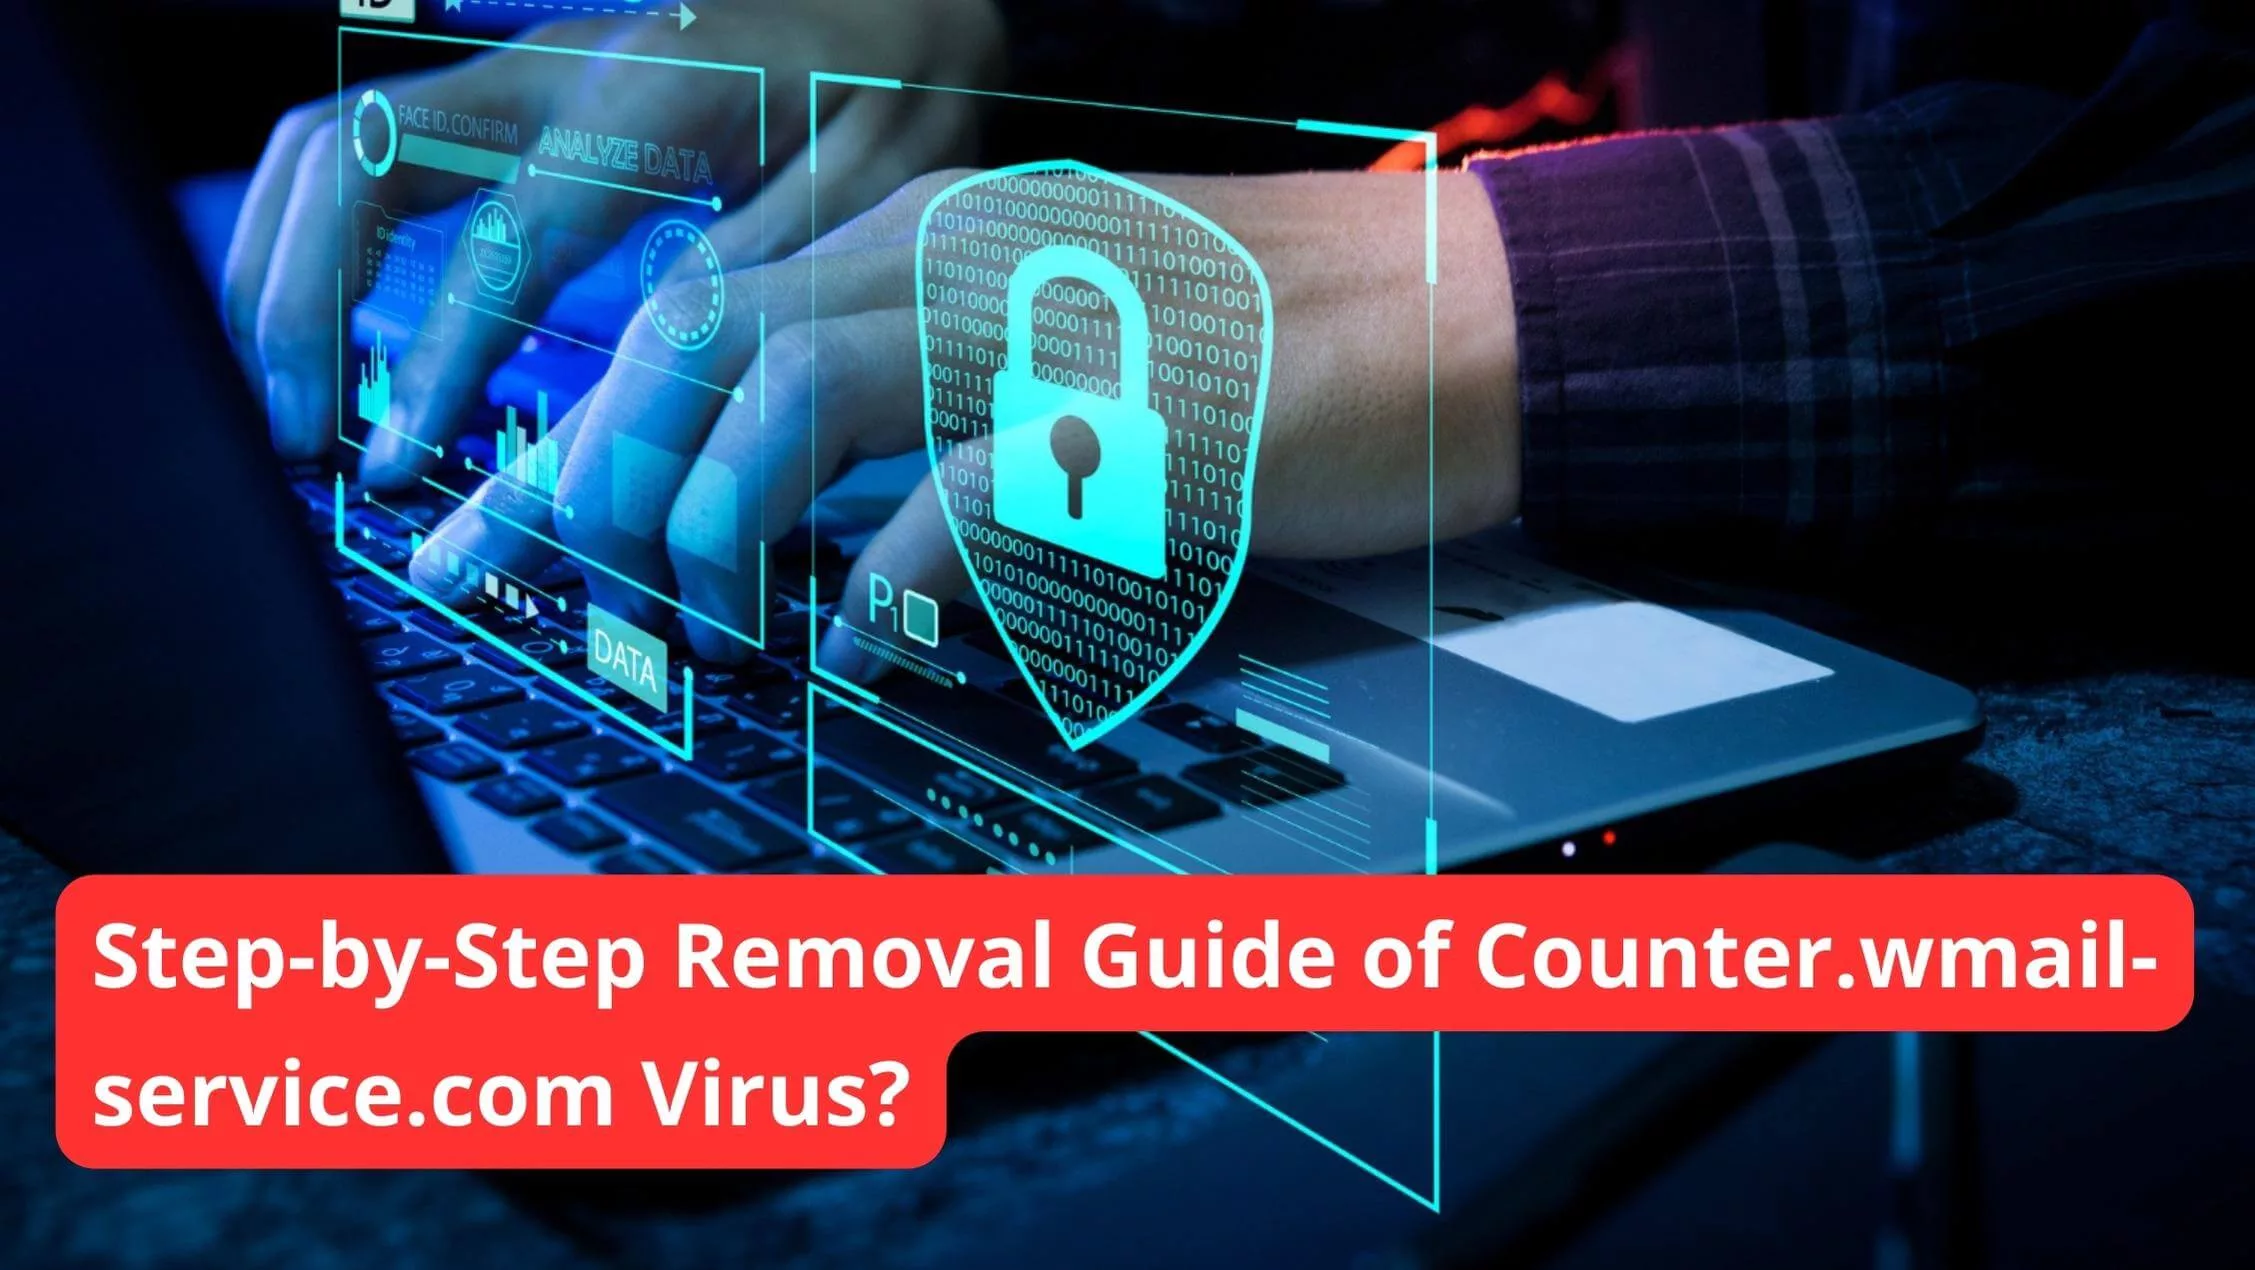 Step-by-Step Removal Guide of Counter.wmail-service.com Virus?